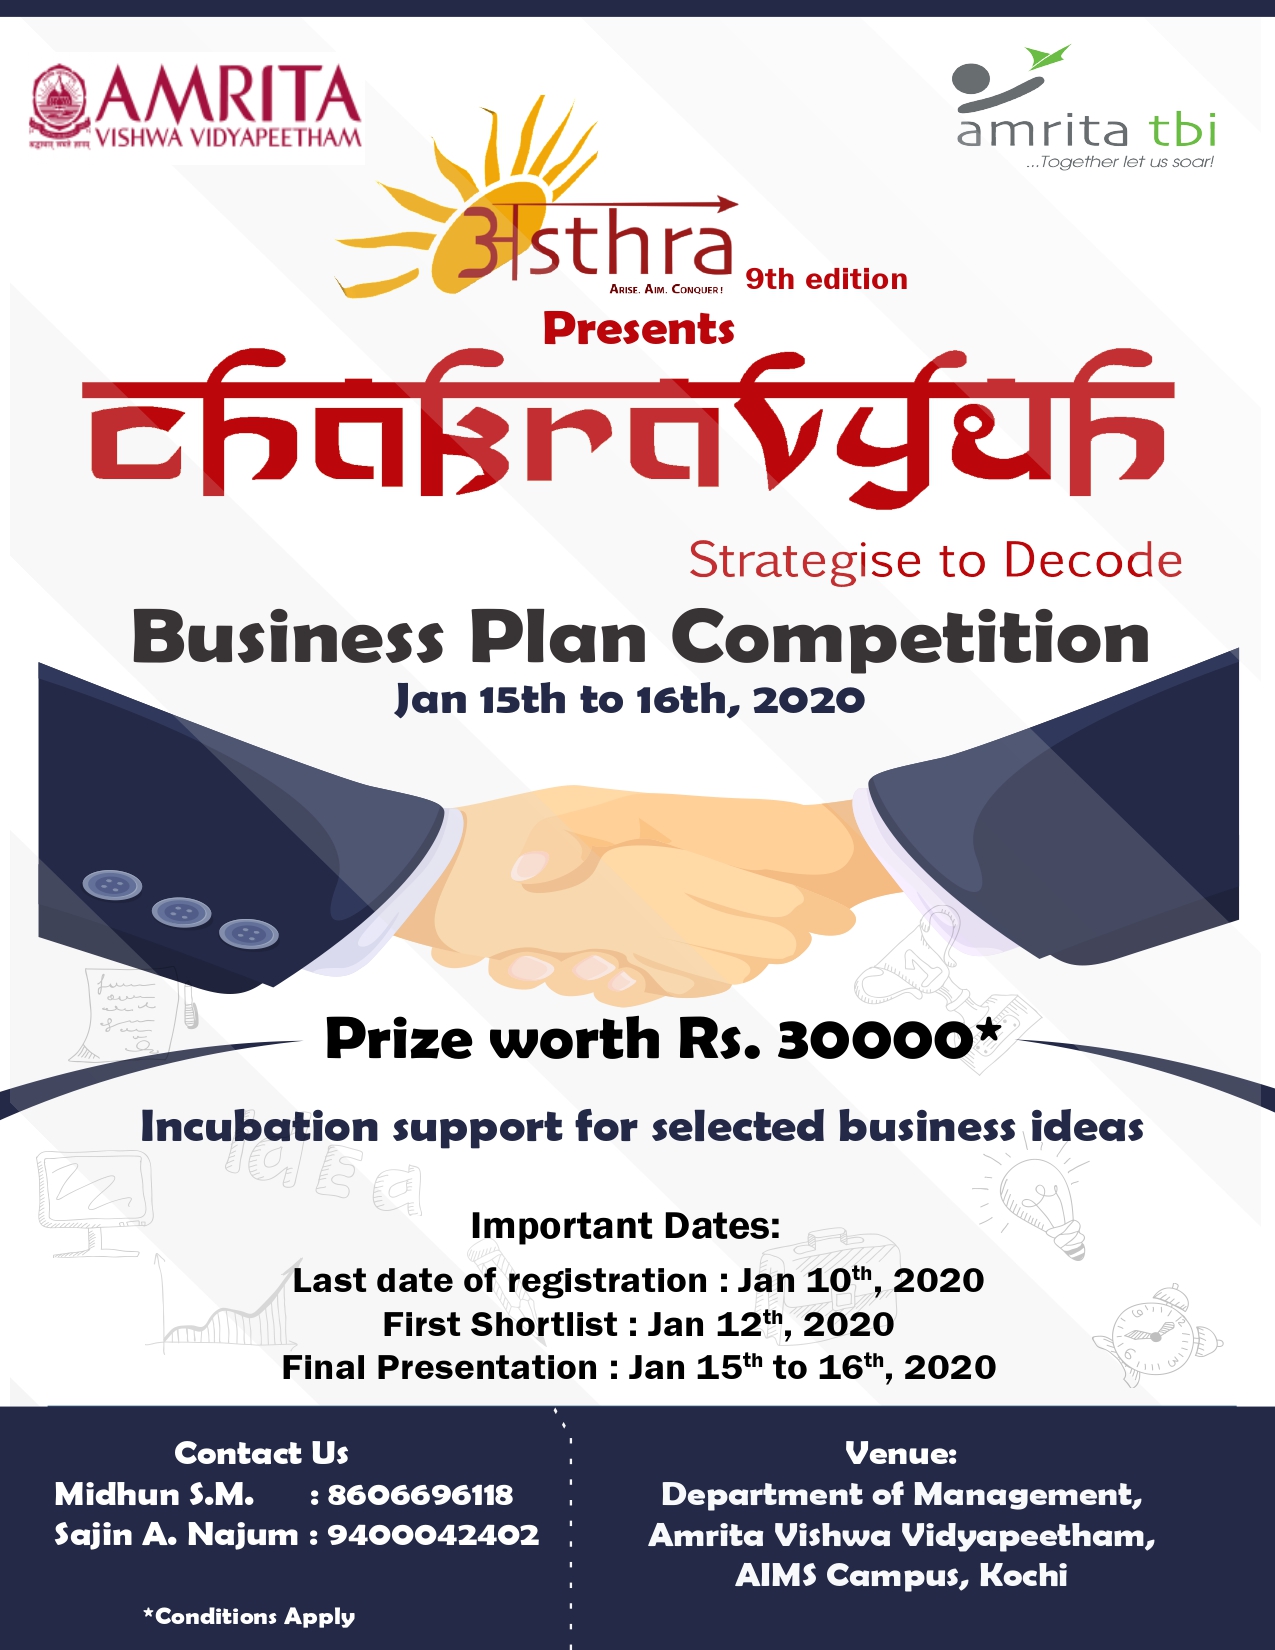 CHAKRAVYUH 2020 Business Plan Competition